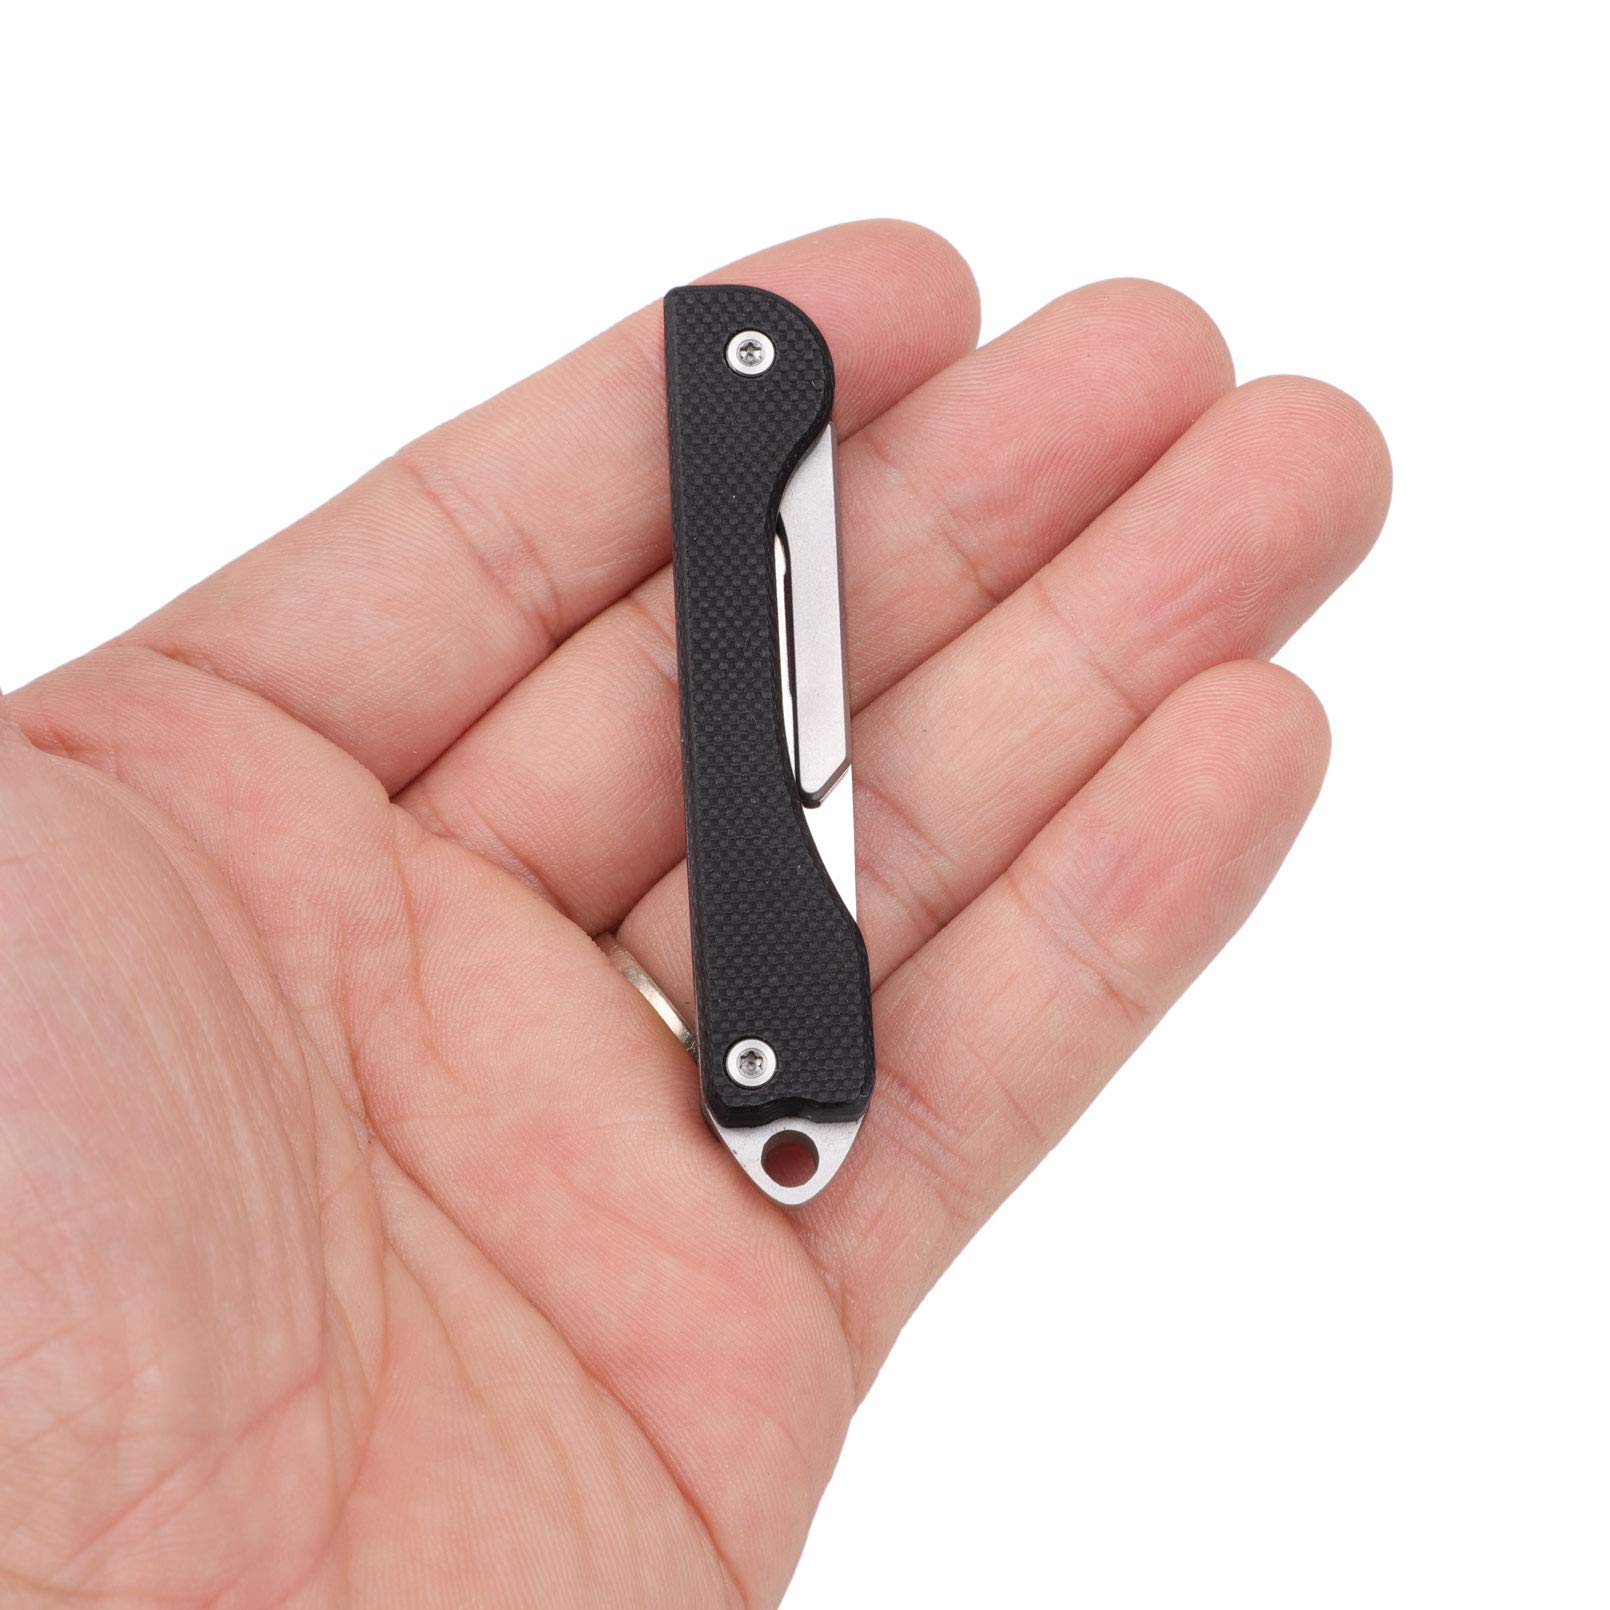 Samior S12 Mini SlipJoint Scalpel Folding Pocket Knife with 10pcs #11 Replaceable Blade, Black G10 Handle Utility EDC Keychain Knife for Box Cutting, Crafting 0.5oz